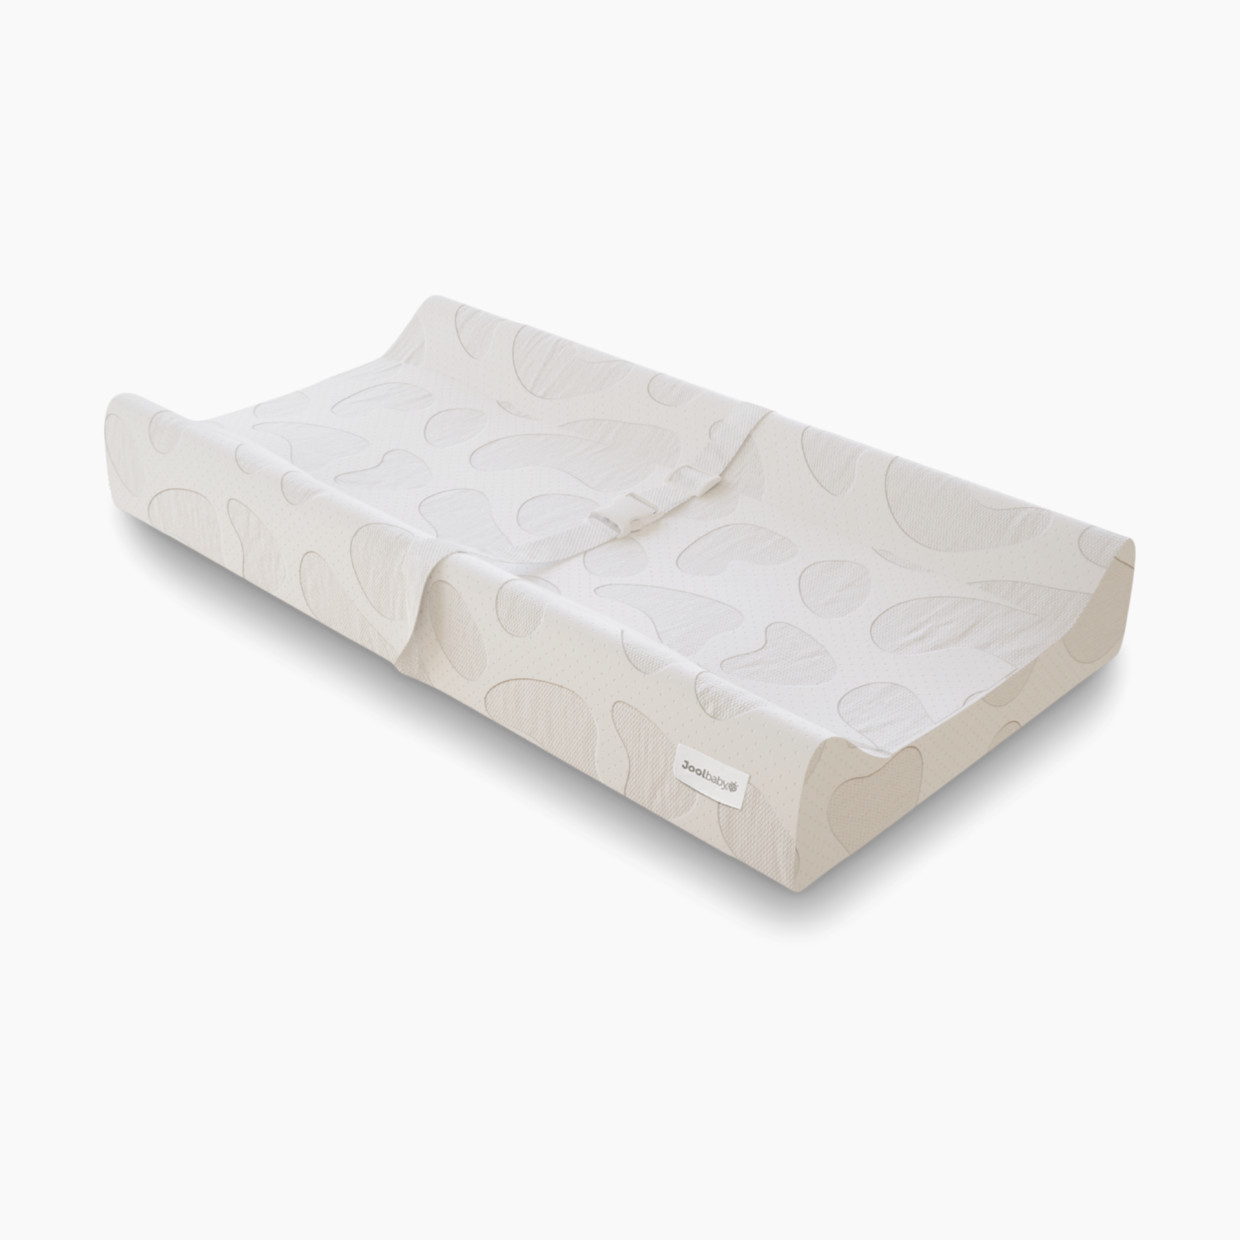 Jool Baby Contoured Changing Pad with Cover - White Pebble.